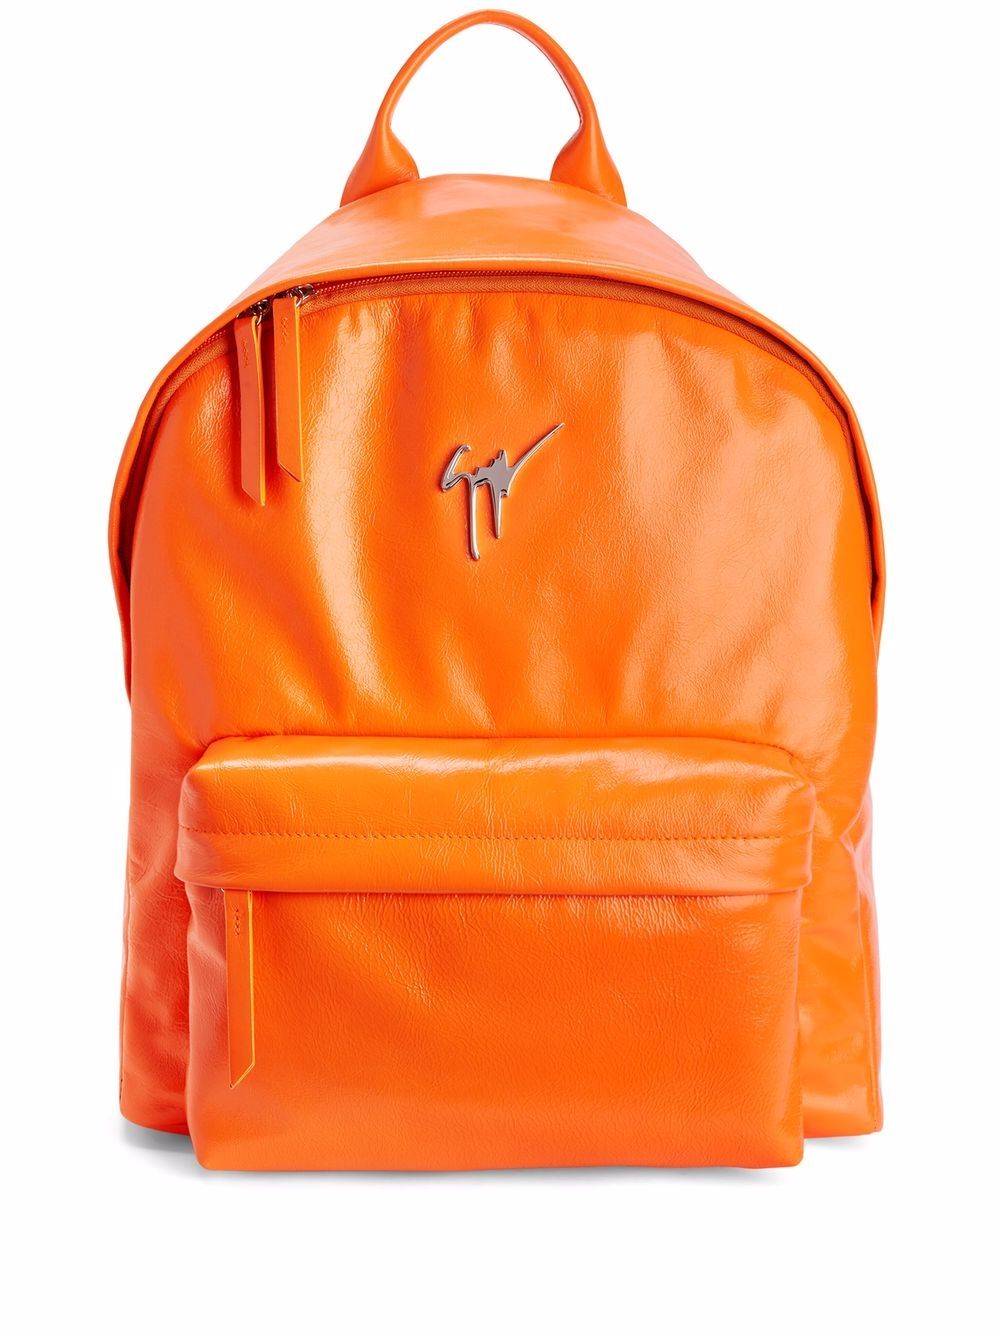 Bud leather backpack